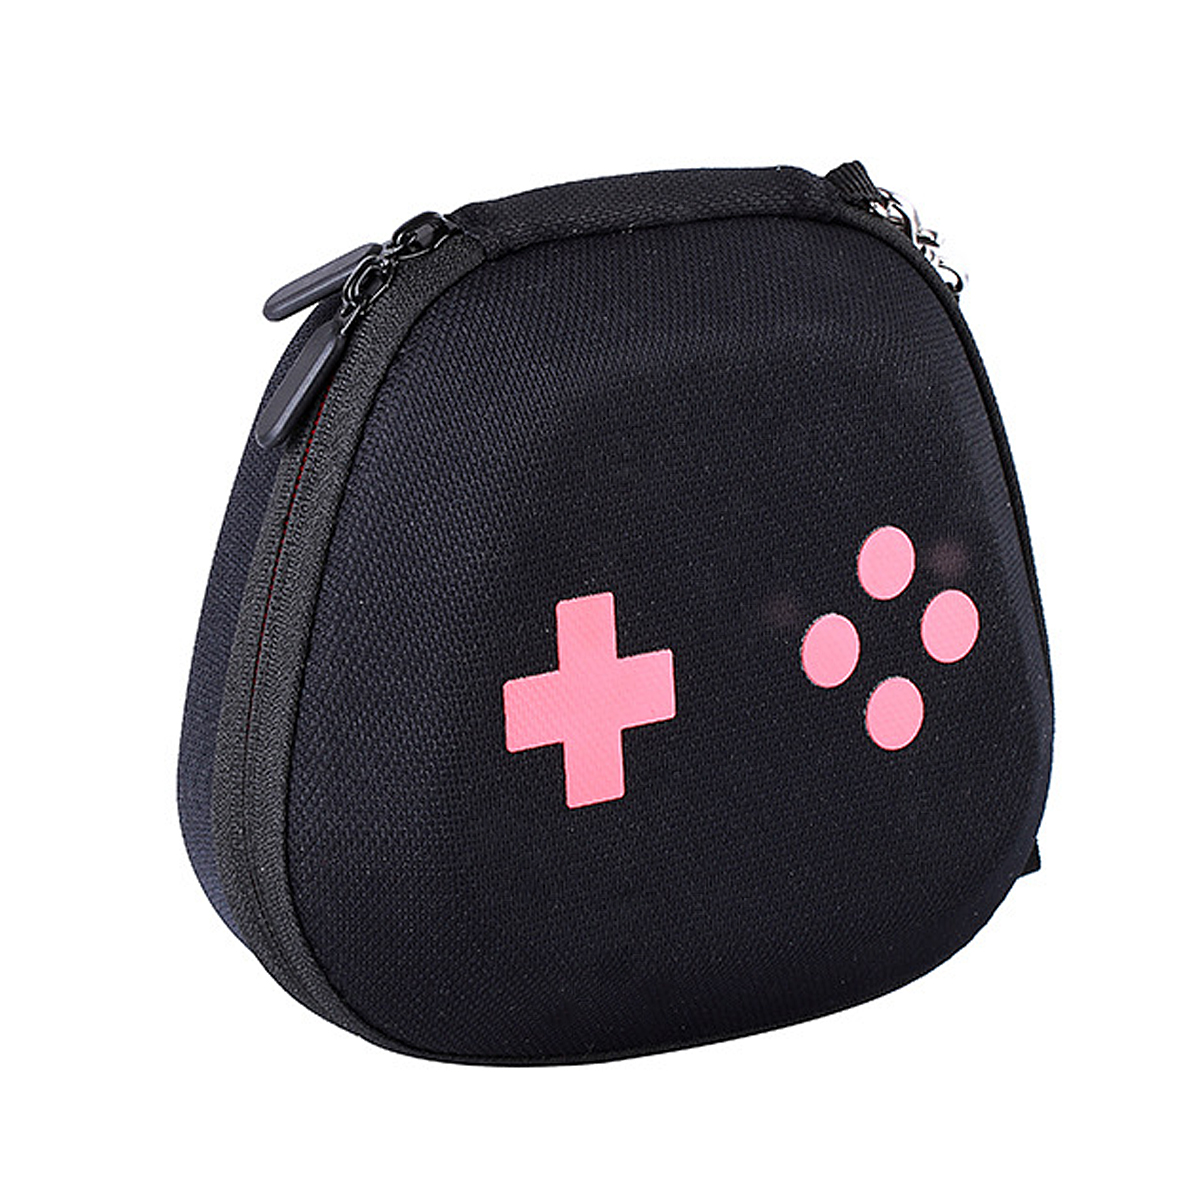 Universal-Black-Portable-Game-Console-Handle-Storage-Bag-Protective-Bags-for-Gamepad-1378387-1